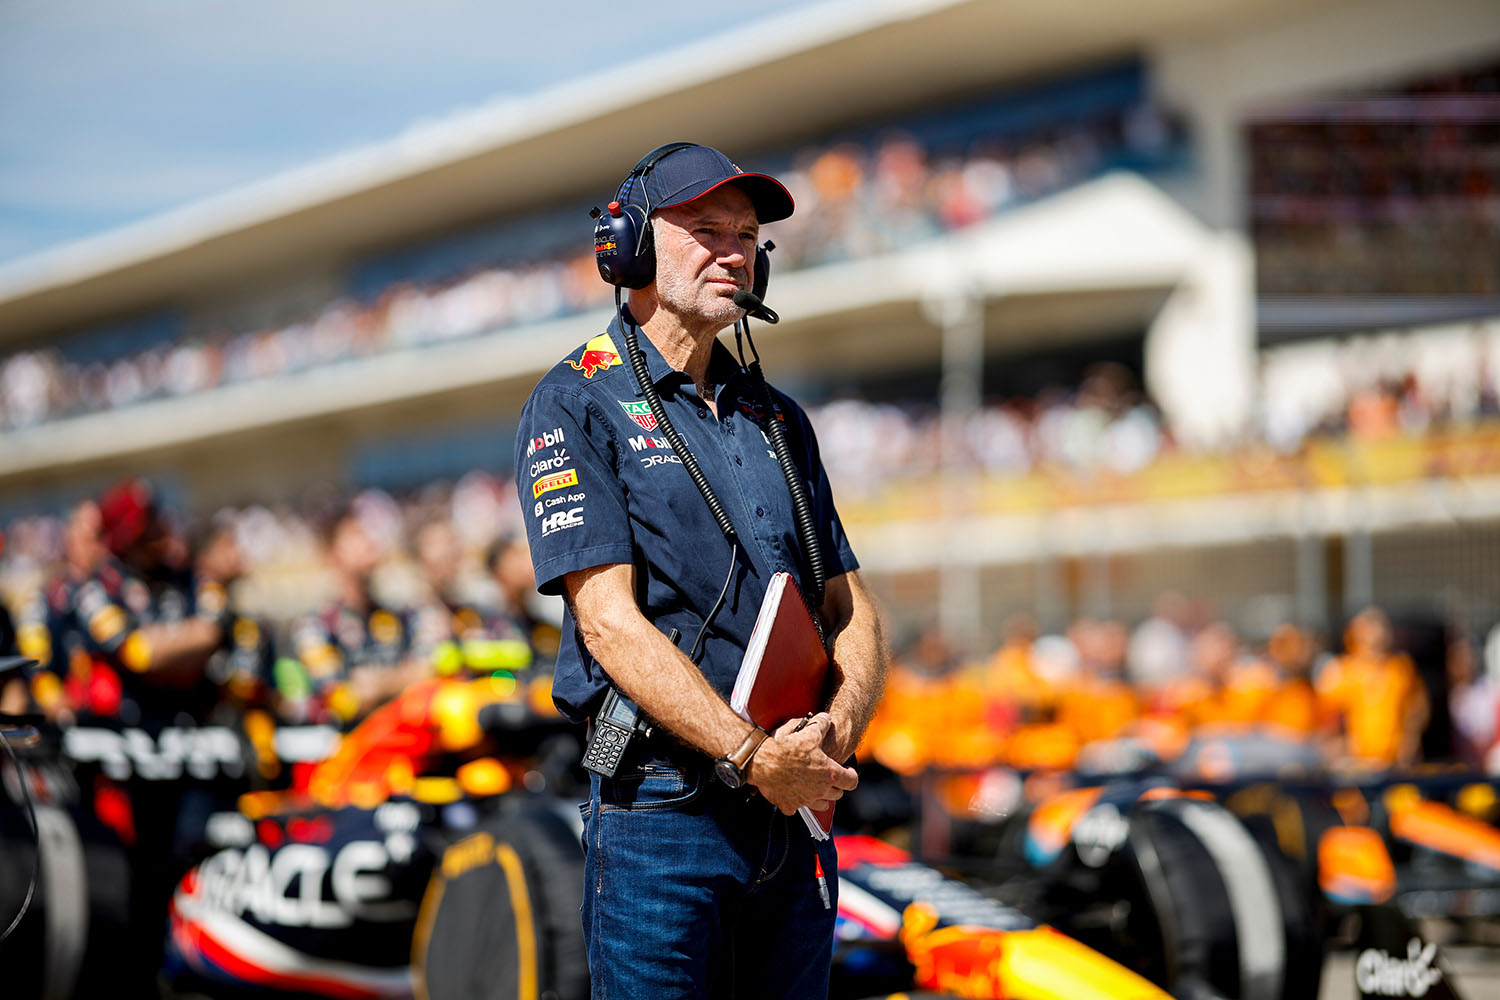 Adrian Newey To Leave Red Bull In 2025 After 19 Years